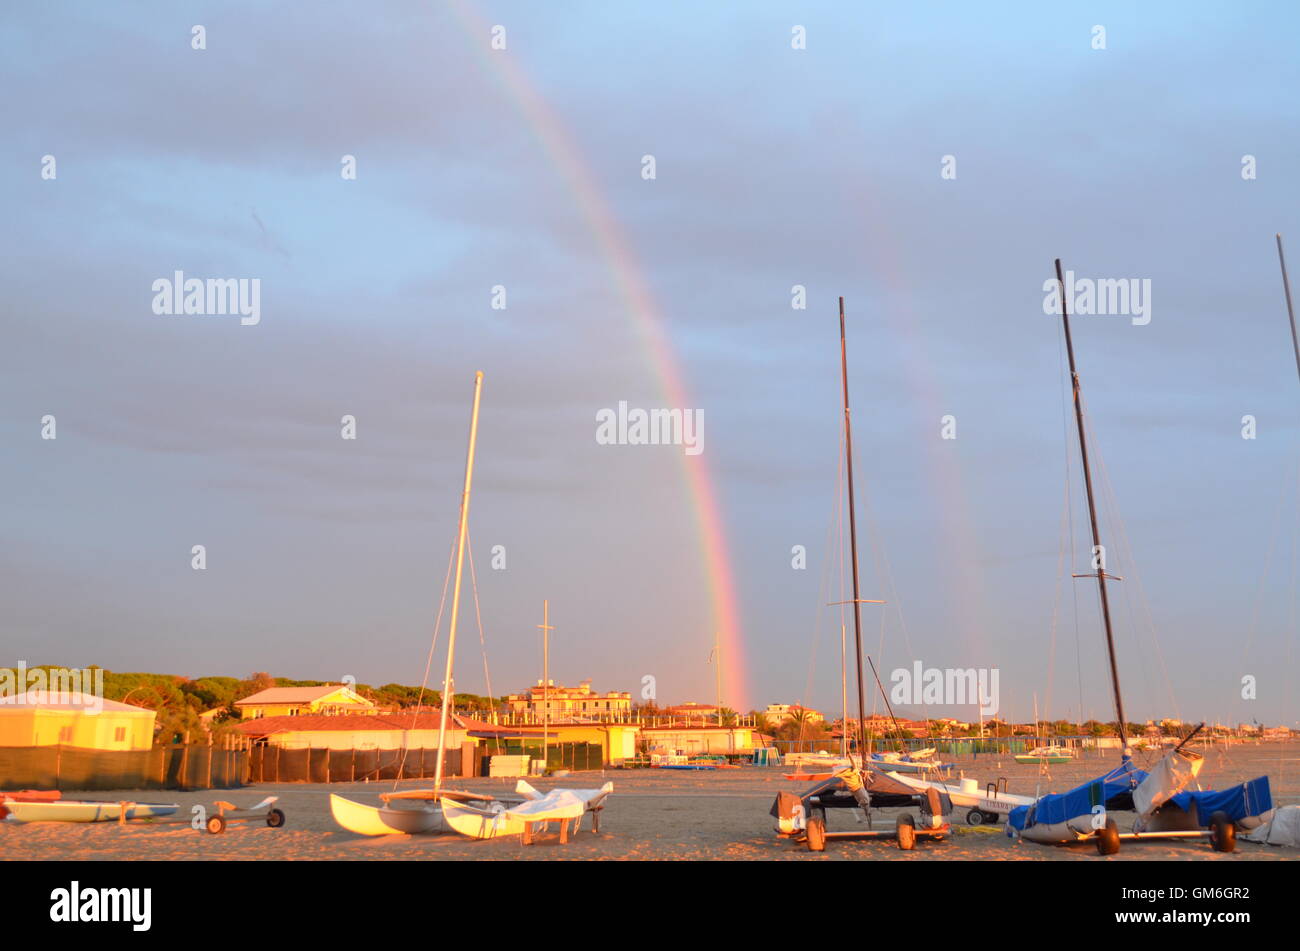 Rainbow is displayed across a sky after the storm Stock Photo